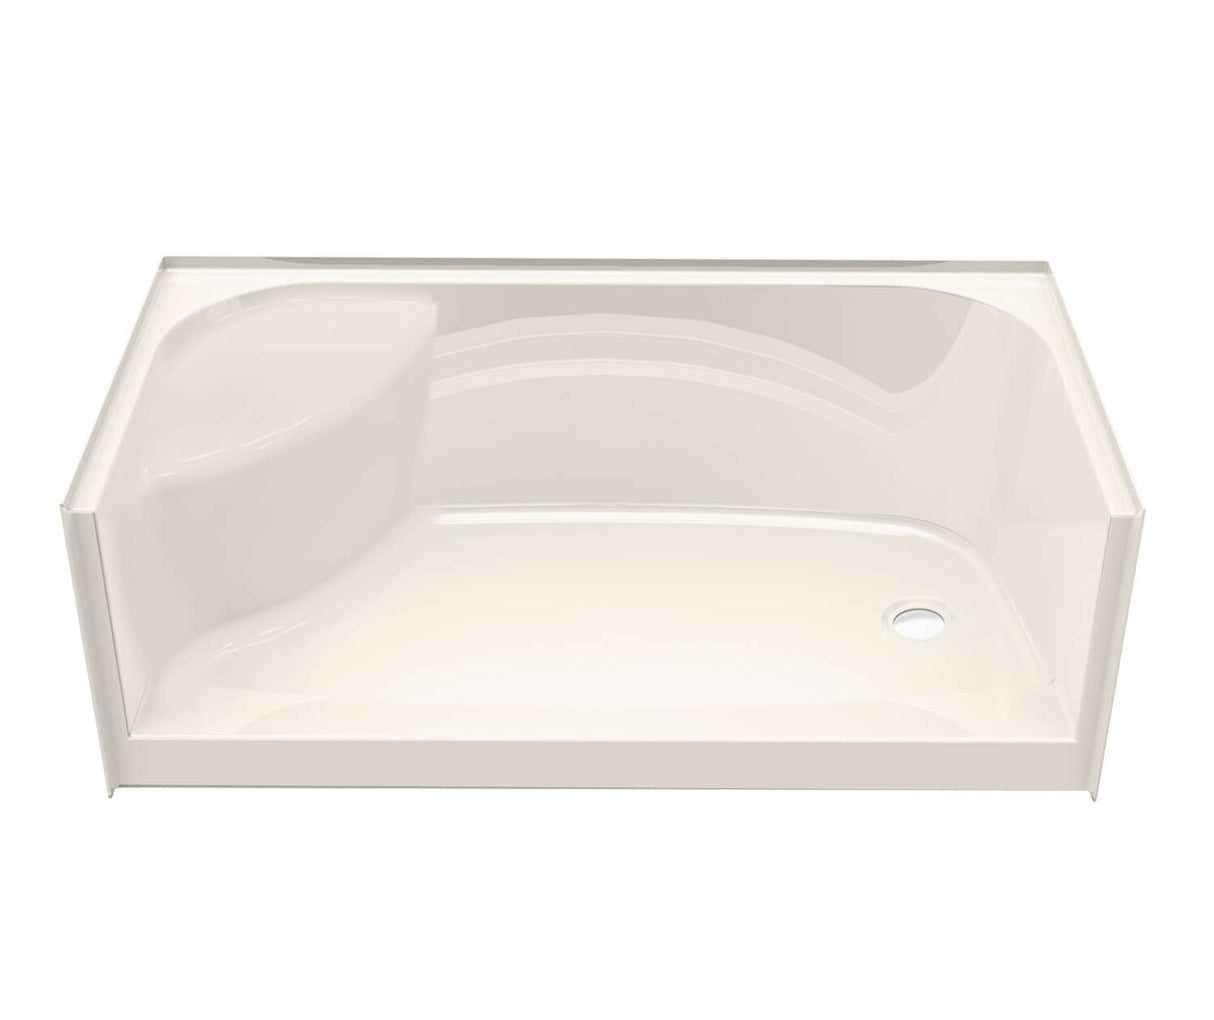 Aker SPS 3460 AFR AcrylX Alcove Center Drain Shower Base in Biscuit